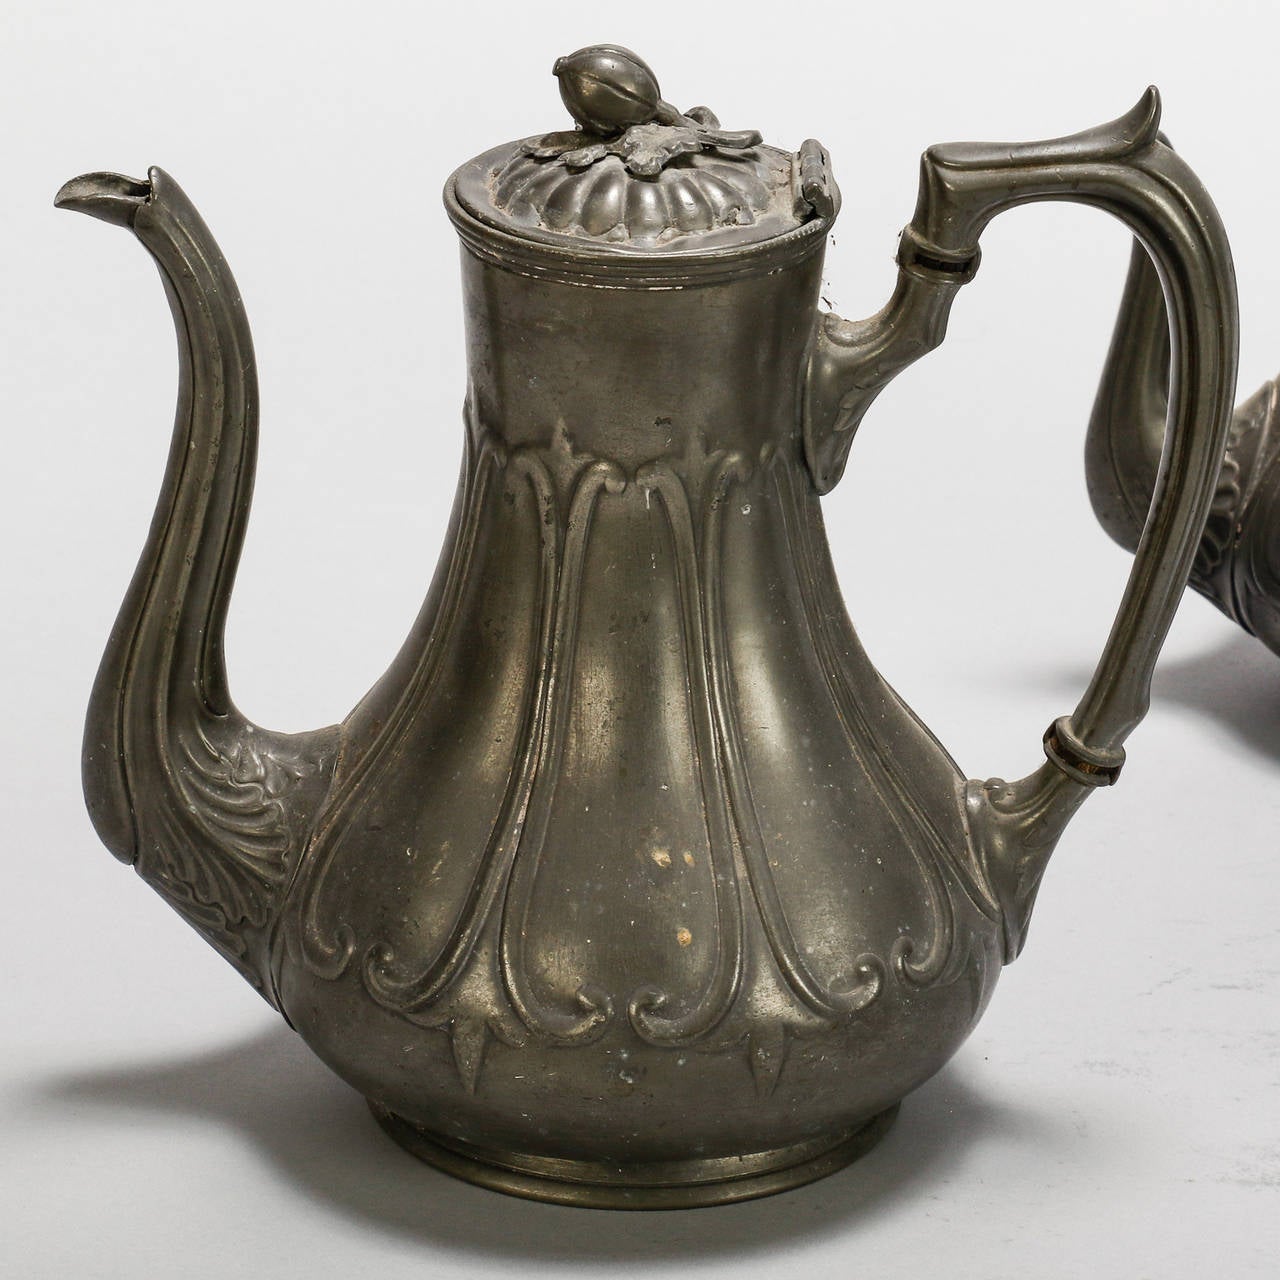 Circa 1940s four piece English pewter coffee / tea set includes coffee pot, tea pot, sugar and creamer. Stamped Grayson & Son, Sheffield. Measurements shown are for the tallest piece which is the coffee pot. Measurements for individual pieces listed